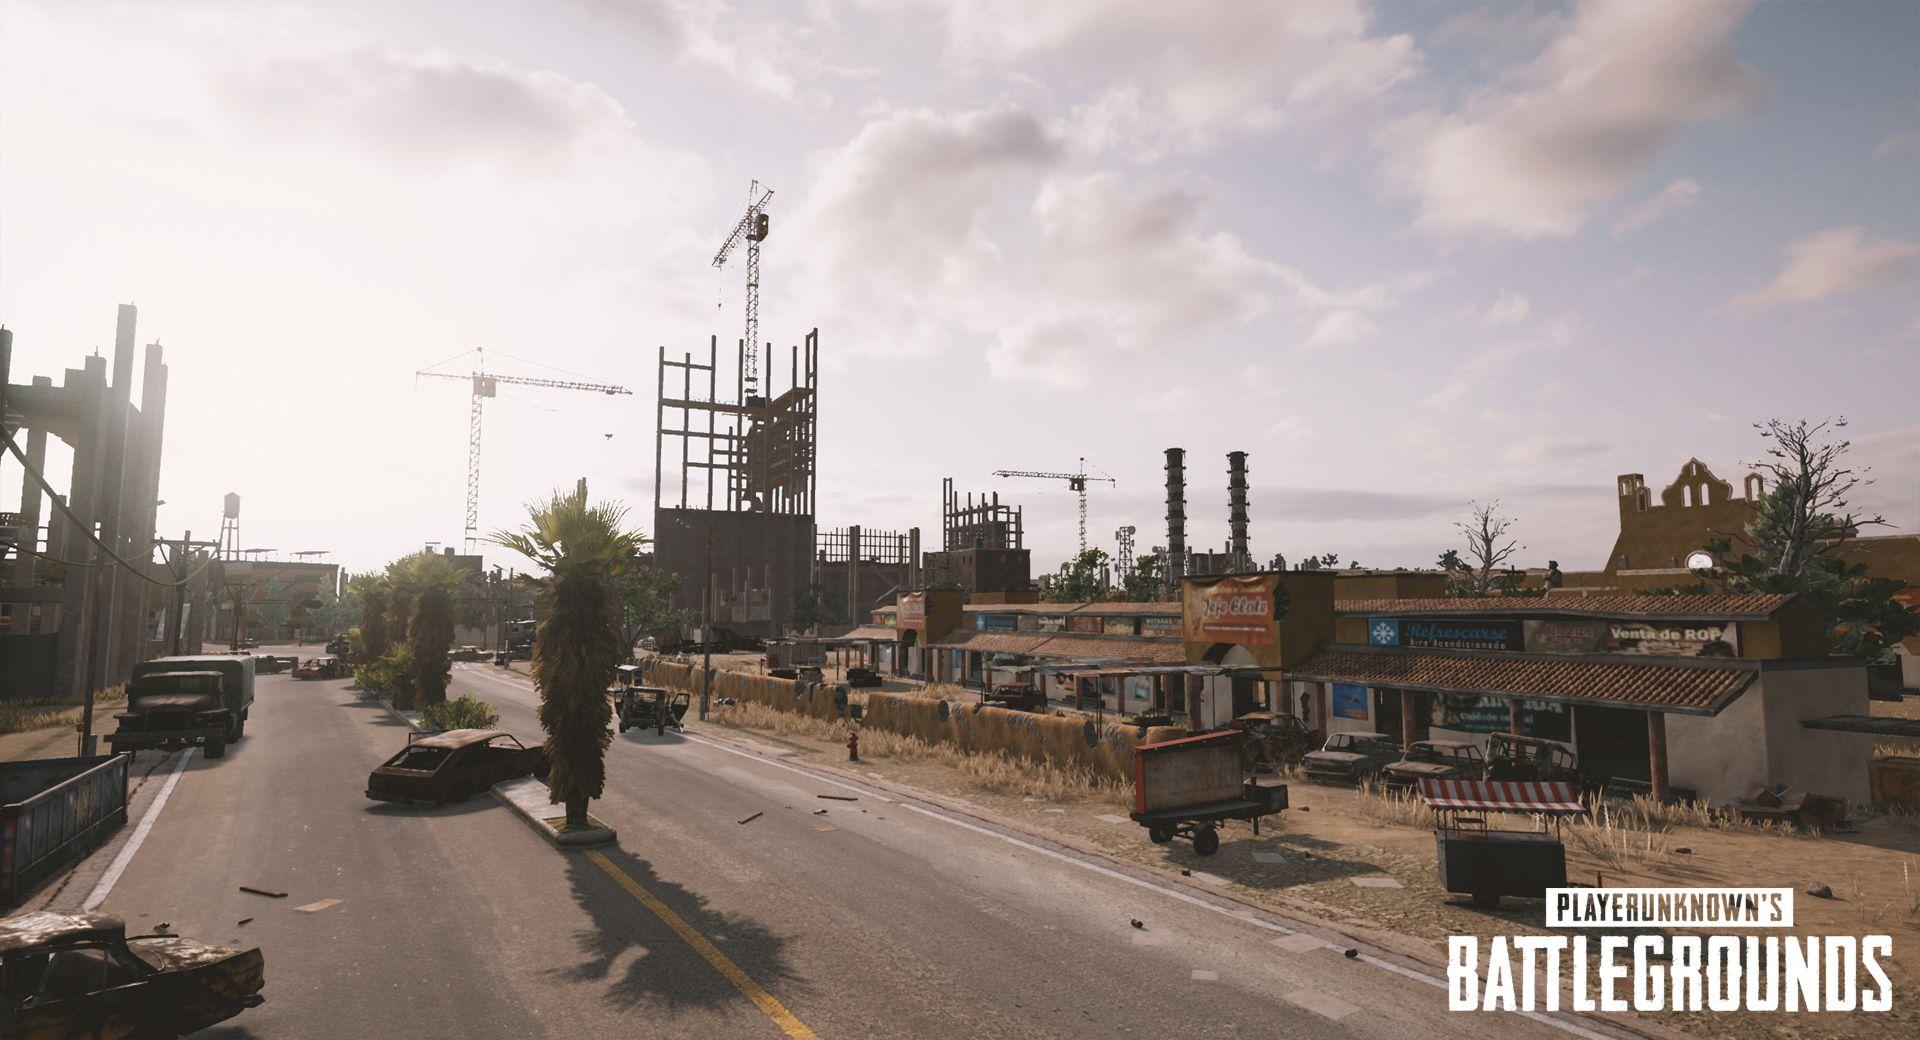 More screenshots of PUBG's new desert map are here, as well as